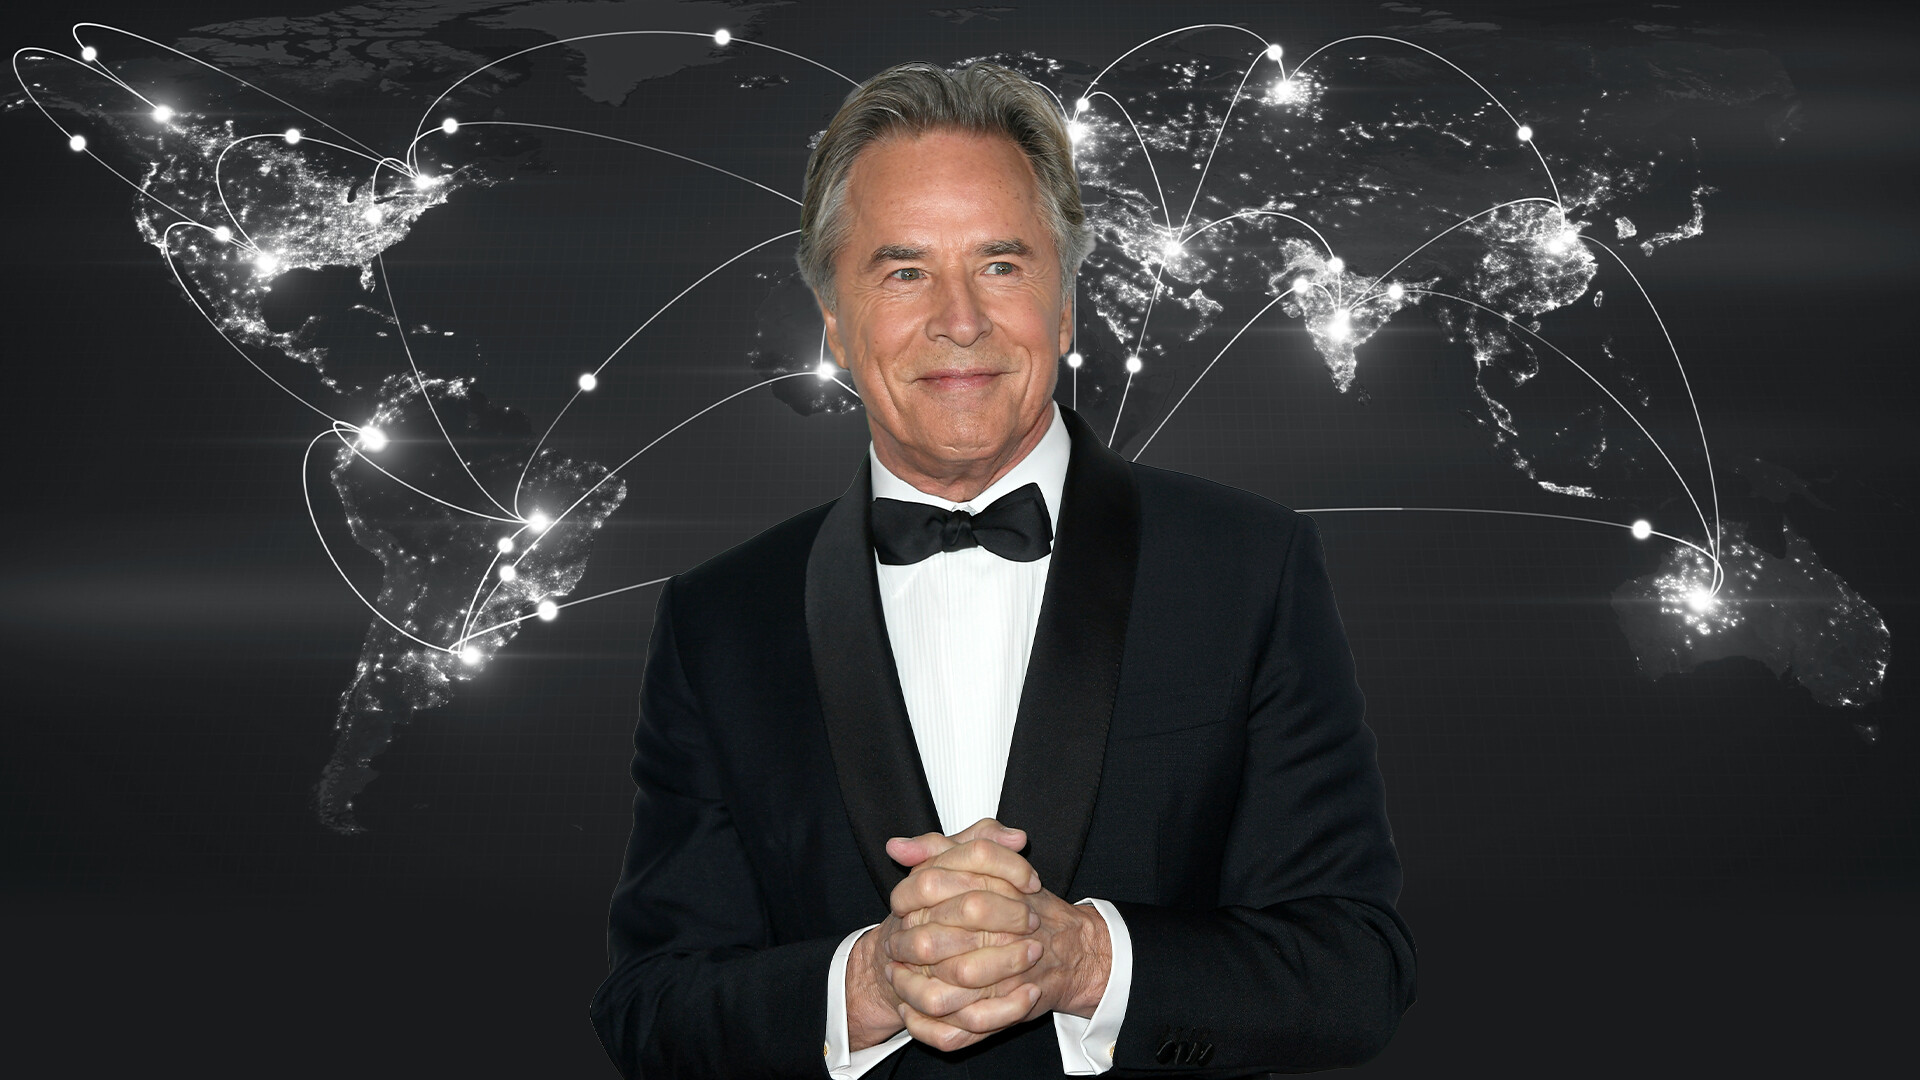 Don Johnson: A multiple award-winning actor, A star on the Hollywood Walk of Fame, The actor who defined the 1980s. 1920x1080 Full HD Wallpaper.